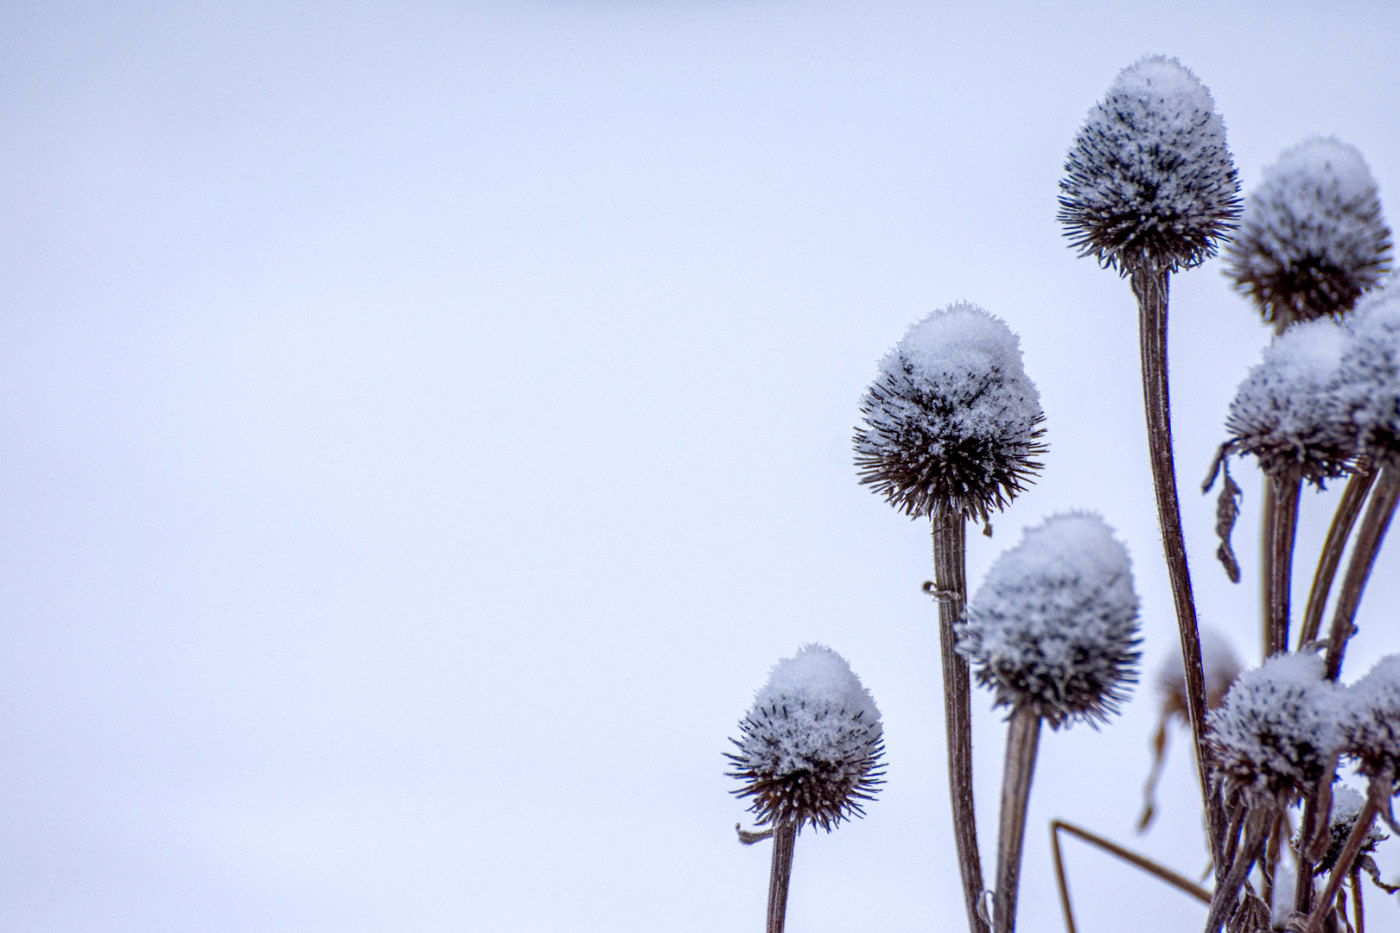 snow-covered dried flower heads on stems on a blank whitish backbround